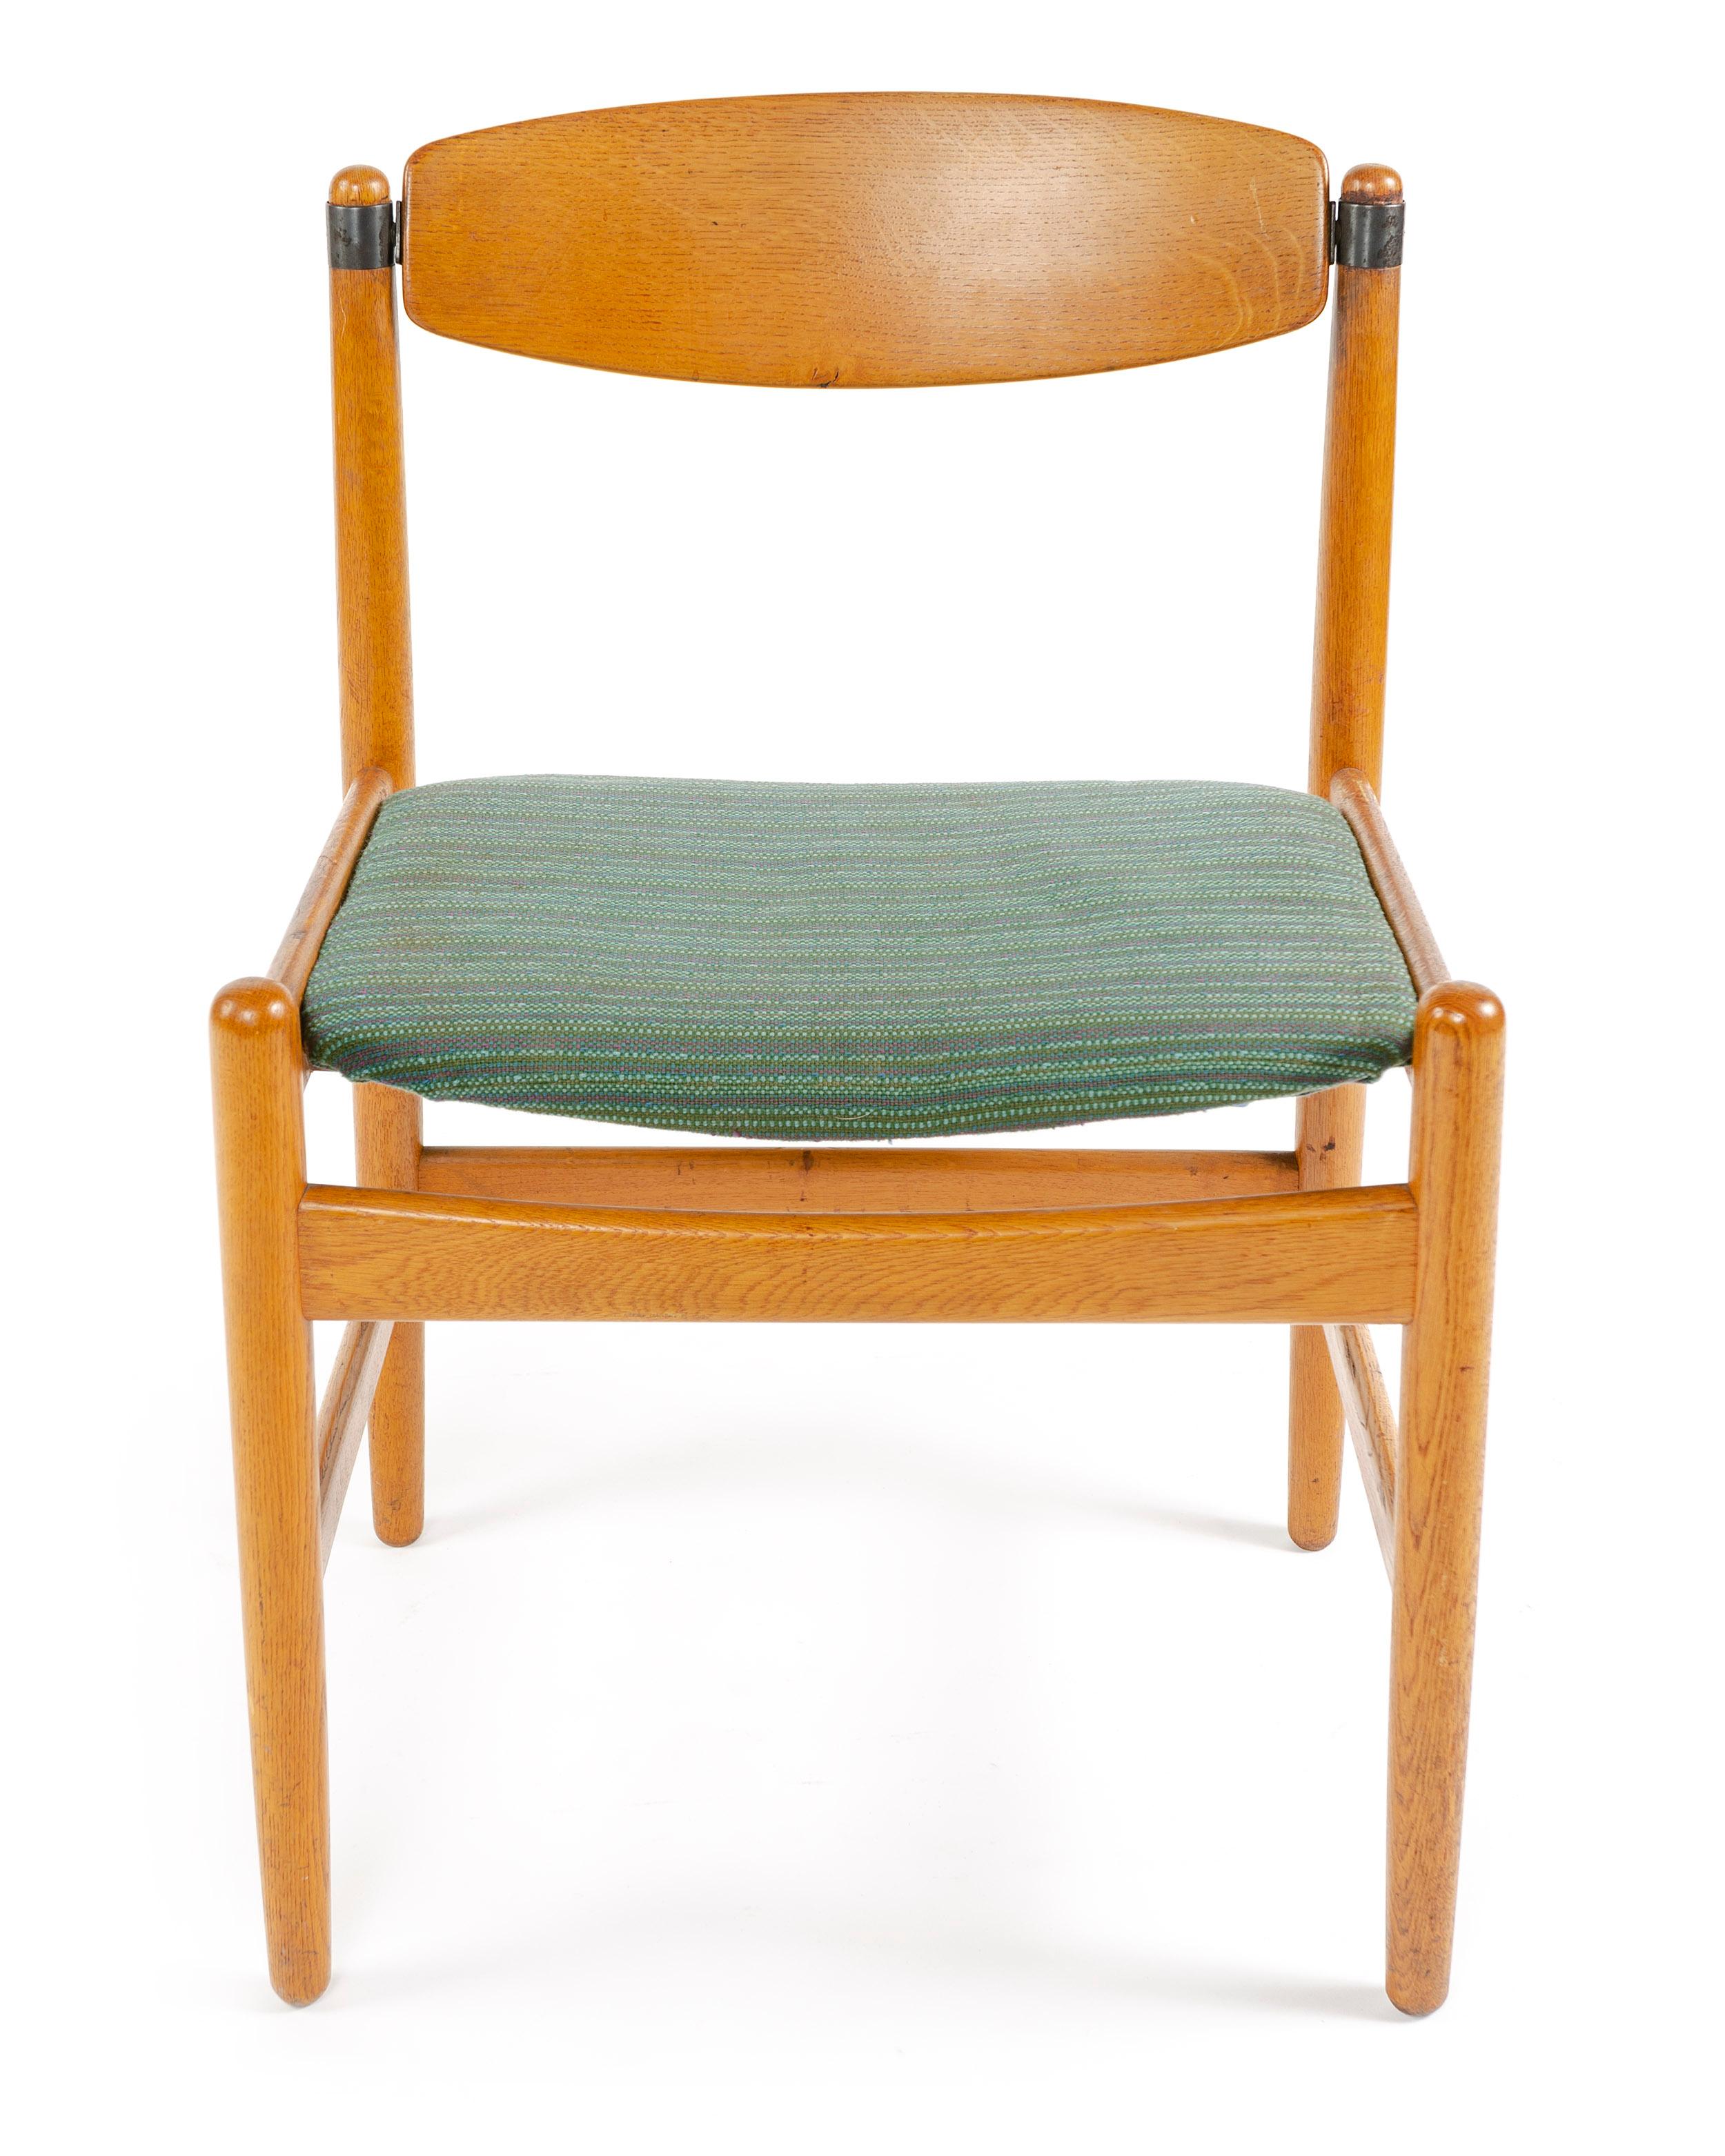 An oak dining chair with a pivoting backrest and upholstered seat. Two chairs available with arms (24